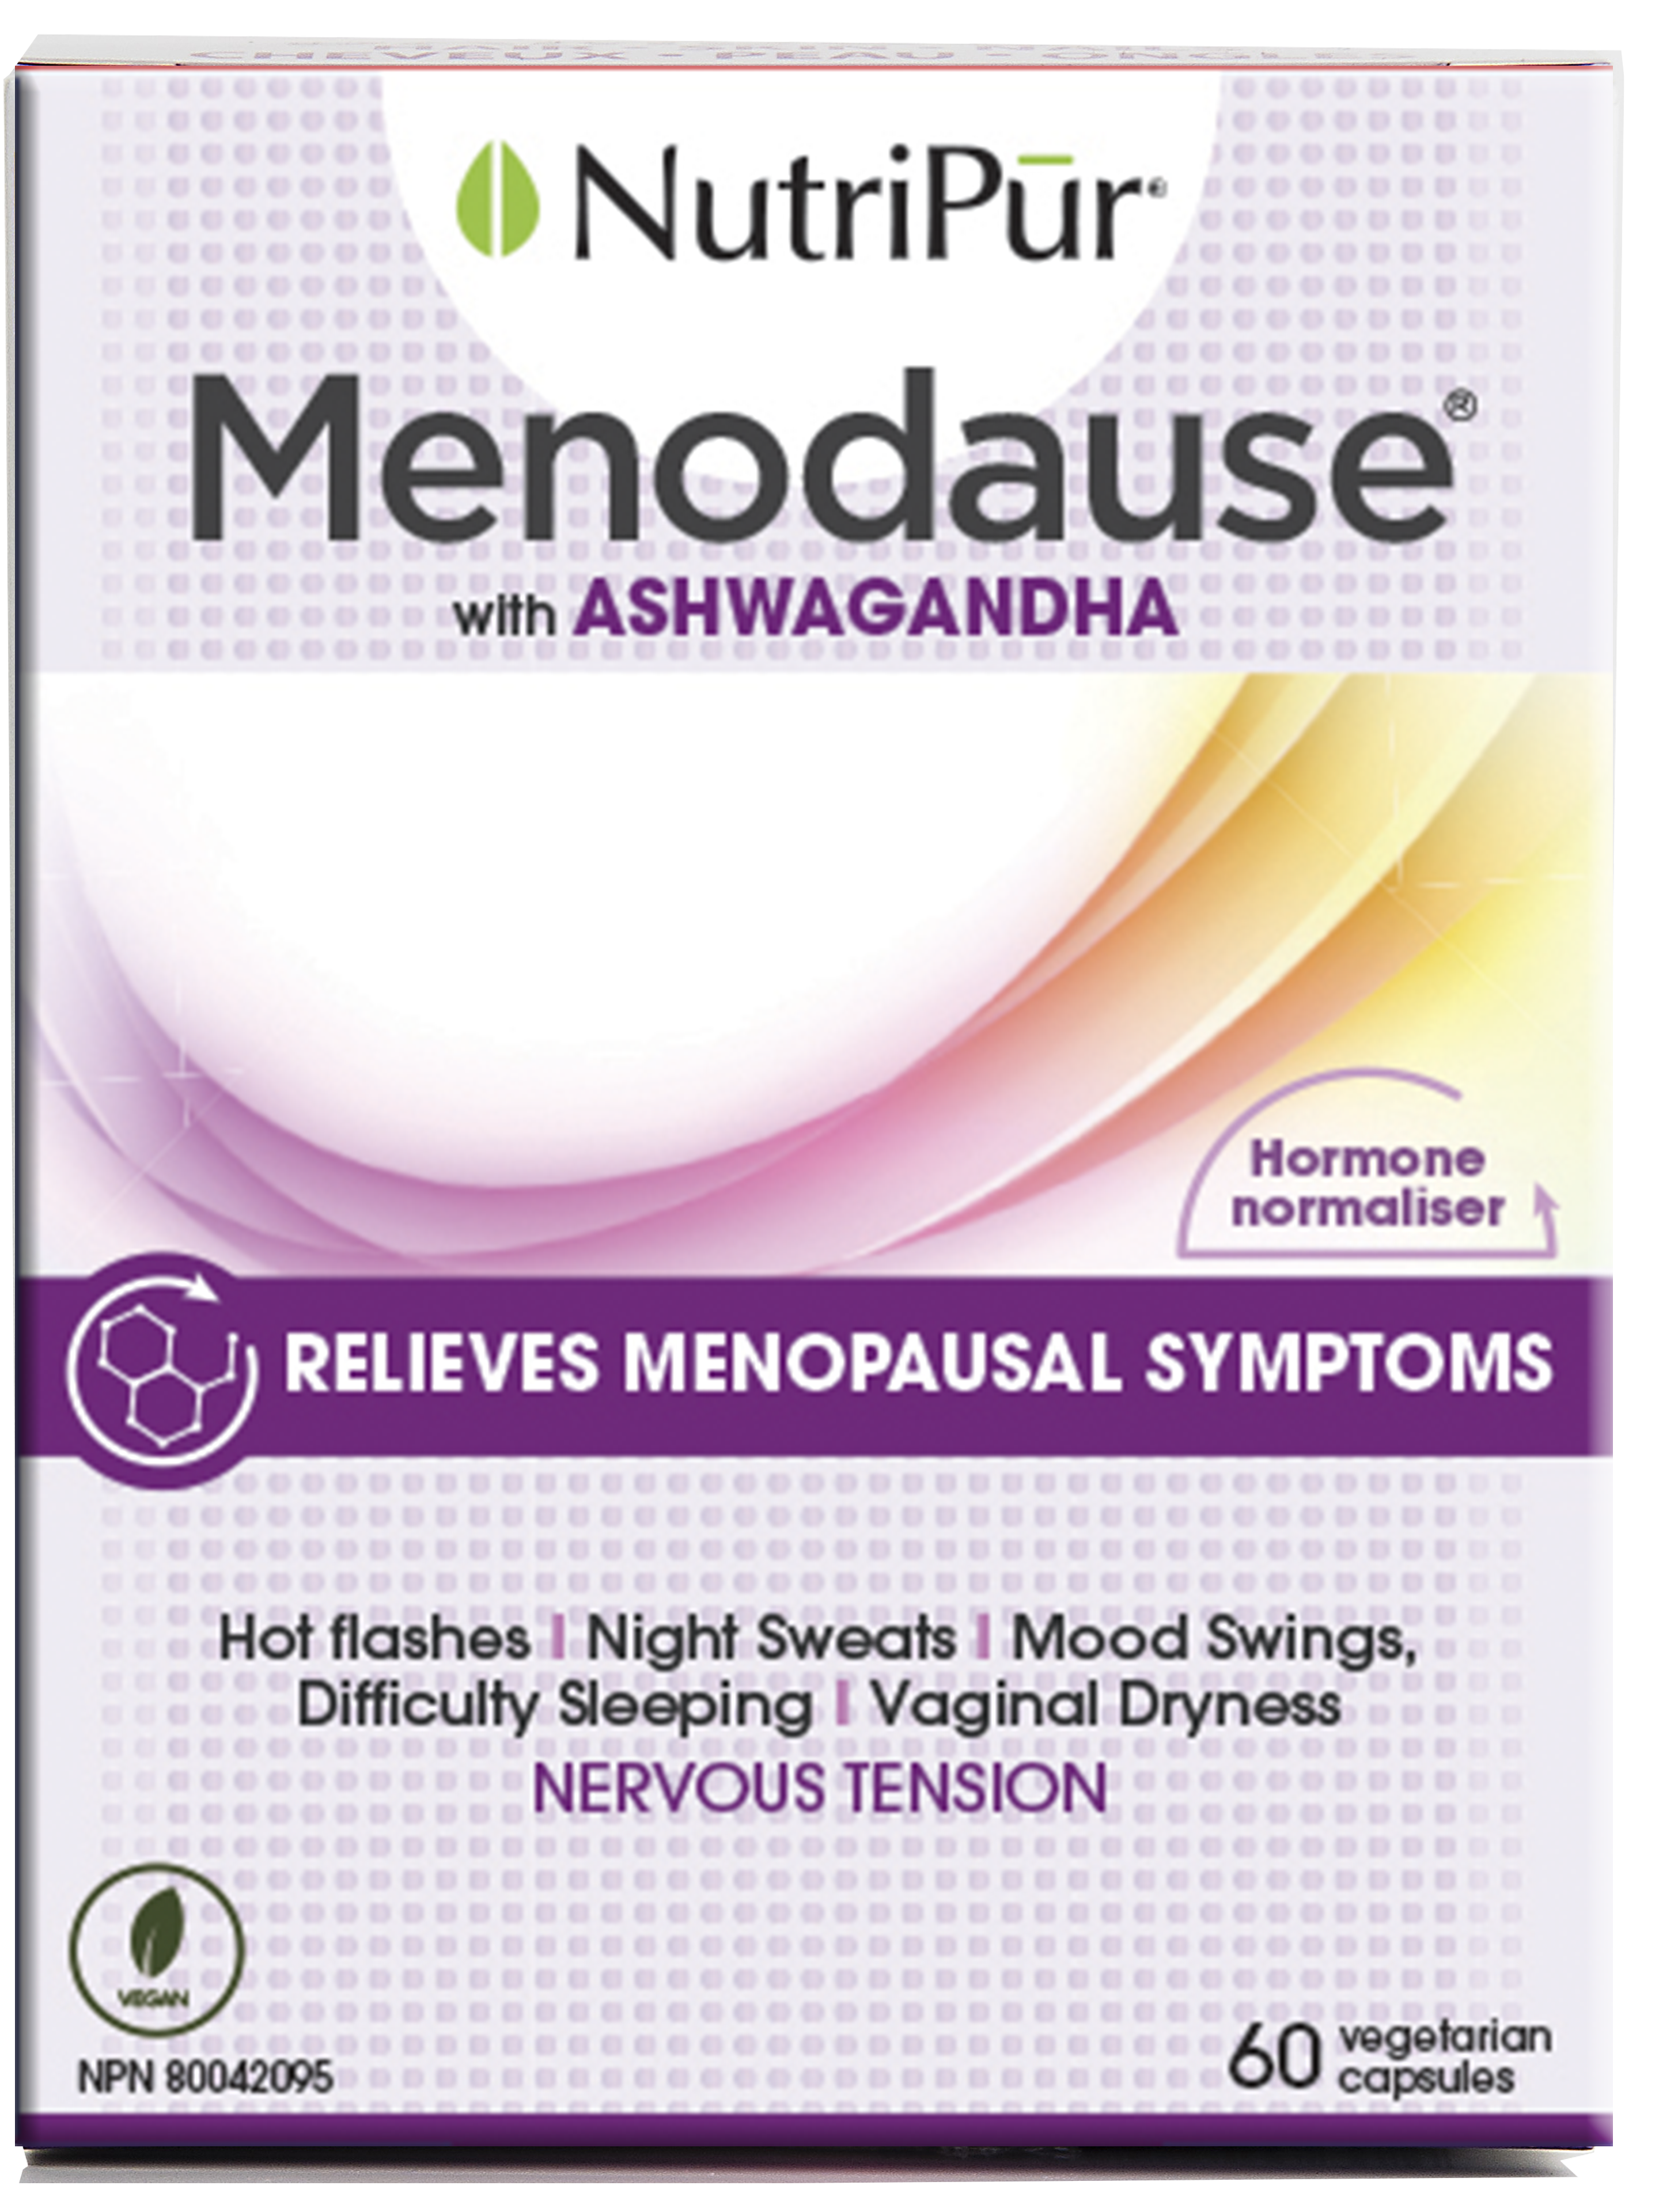 Menodause - with ashagandha - relieves menopausal symptoms - hormone stabiliser - hot flashes - night sweats - mood swings - difficulty sleeping - vaginal dryness - nervous tension